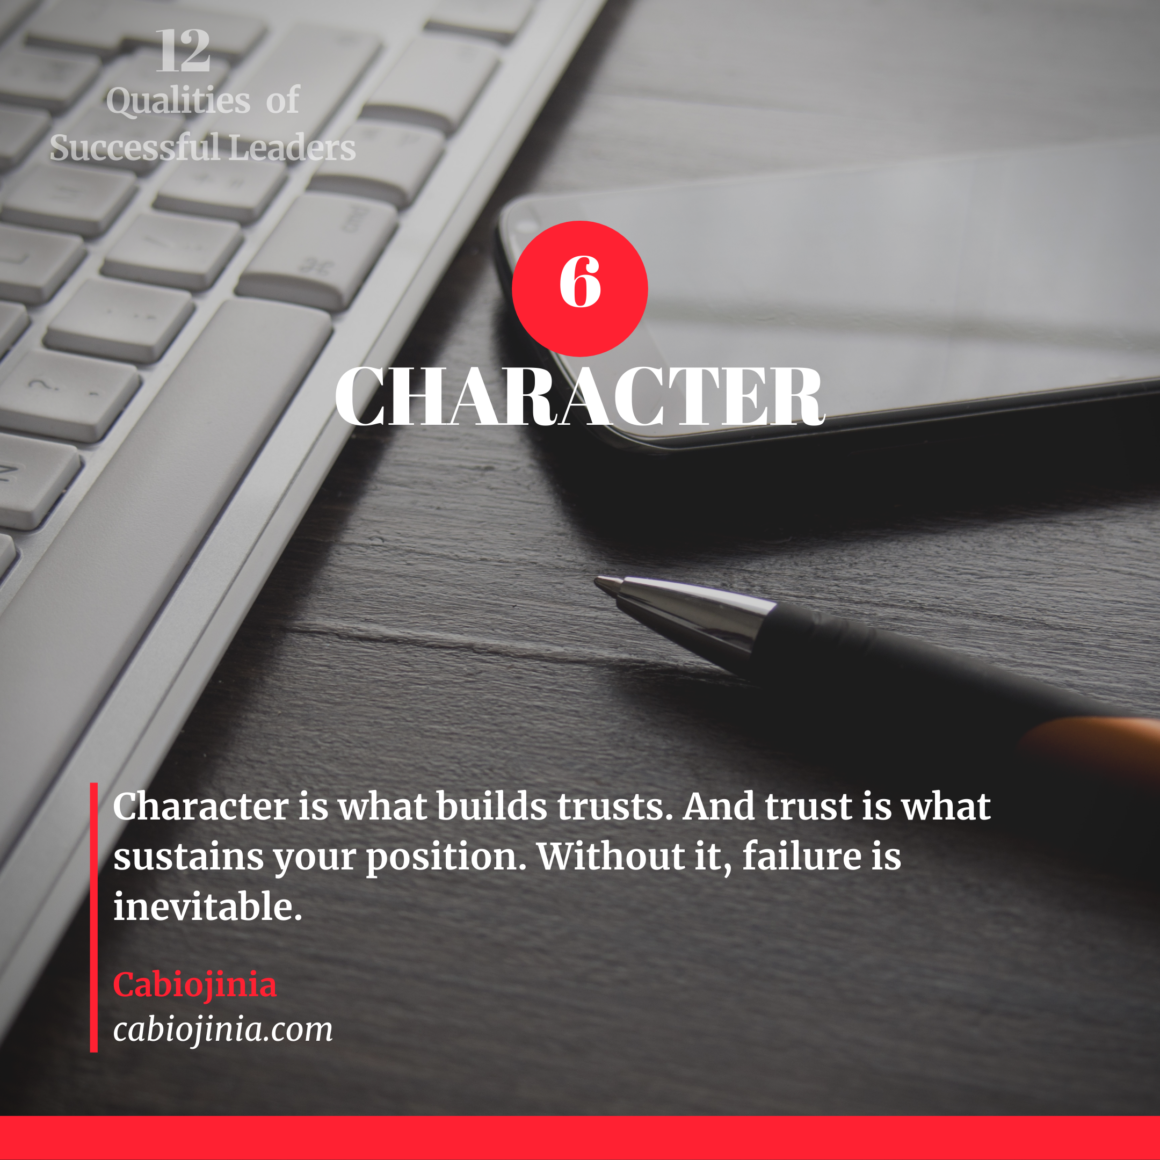 Successful leaders have character. Cabiojinia